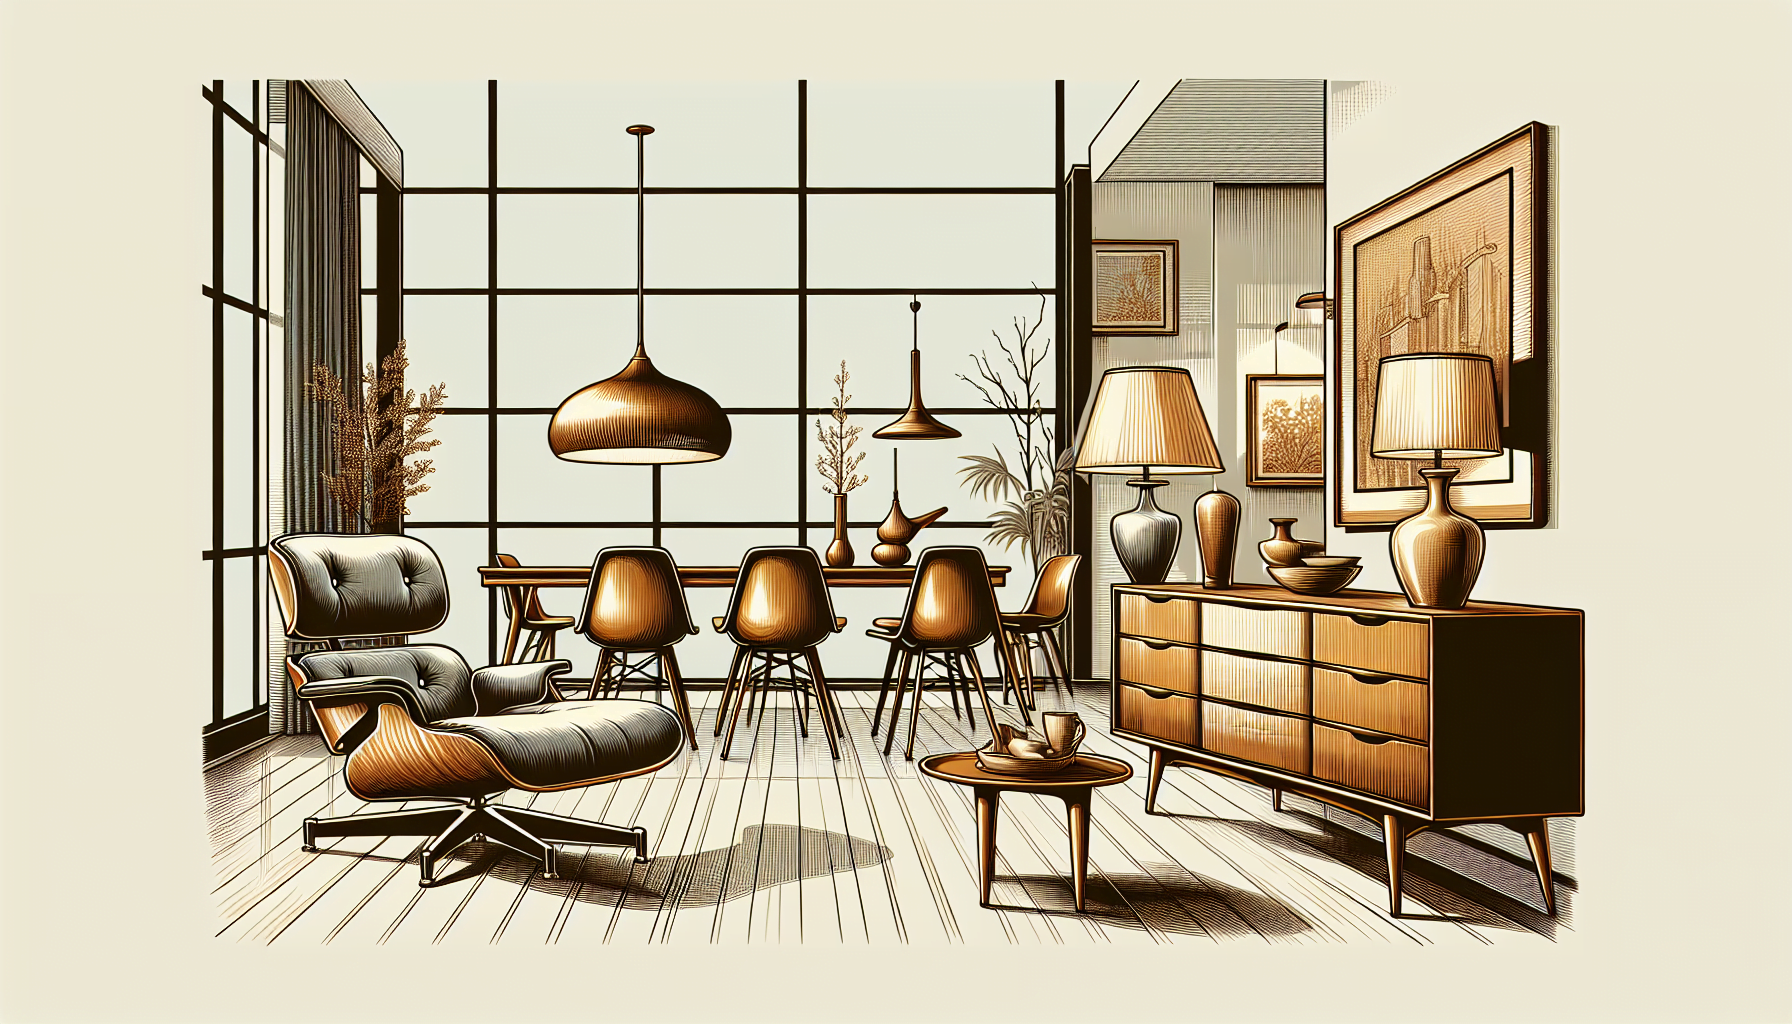 A charming illustration of a curated collection of mid century modern furniture pieces